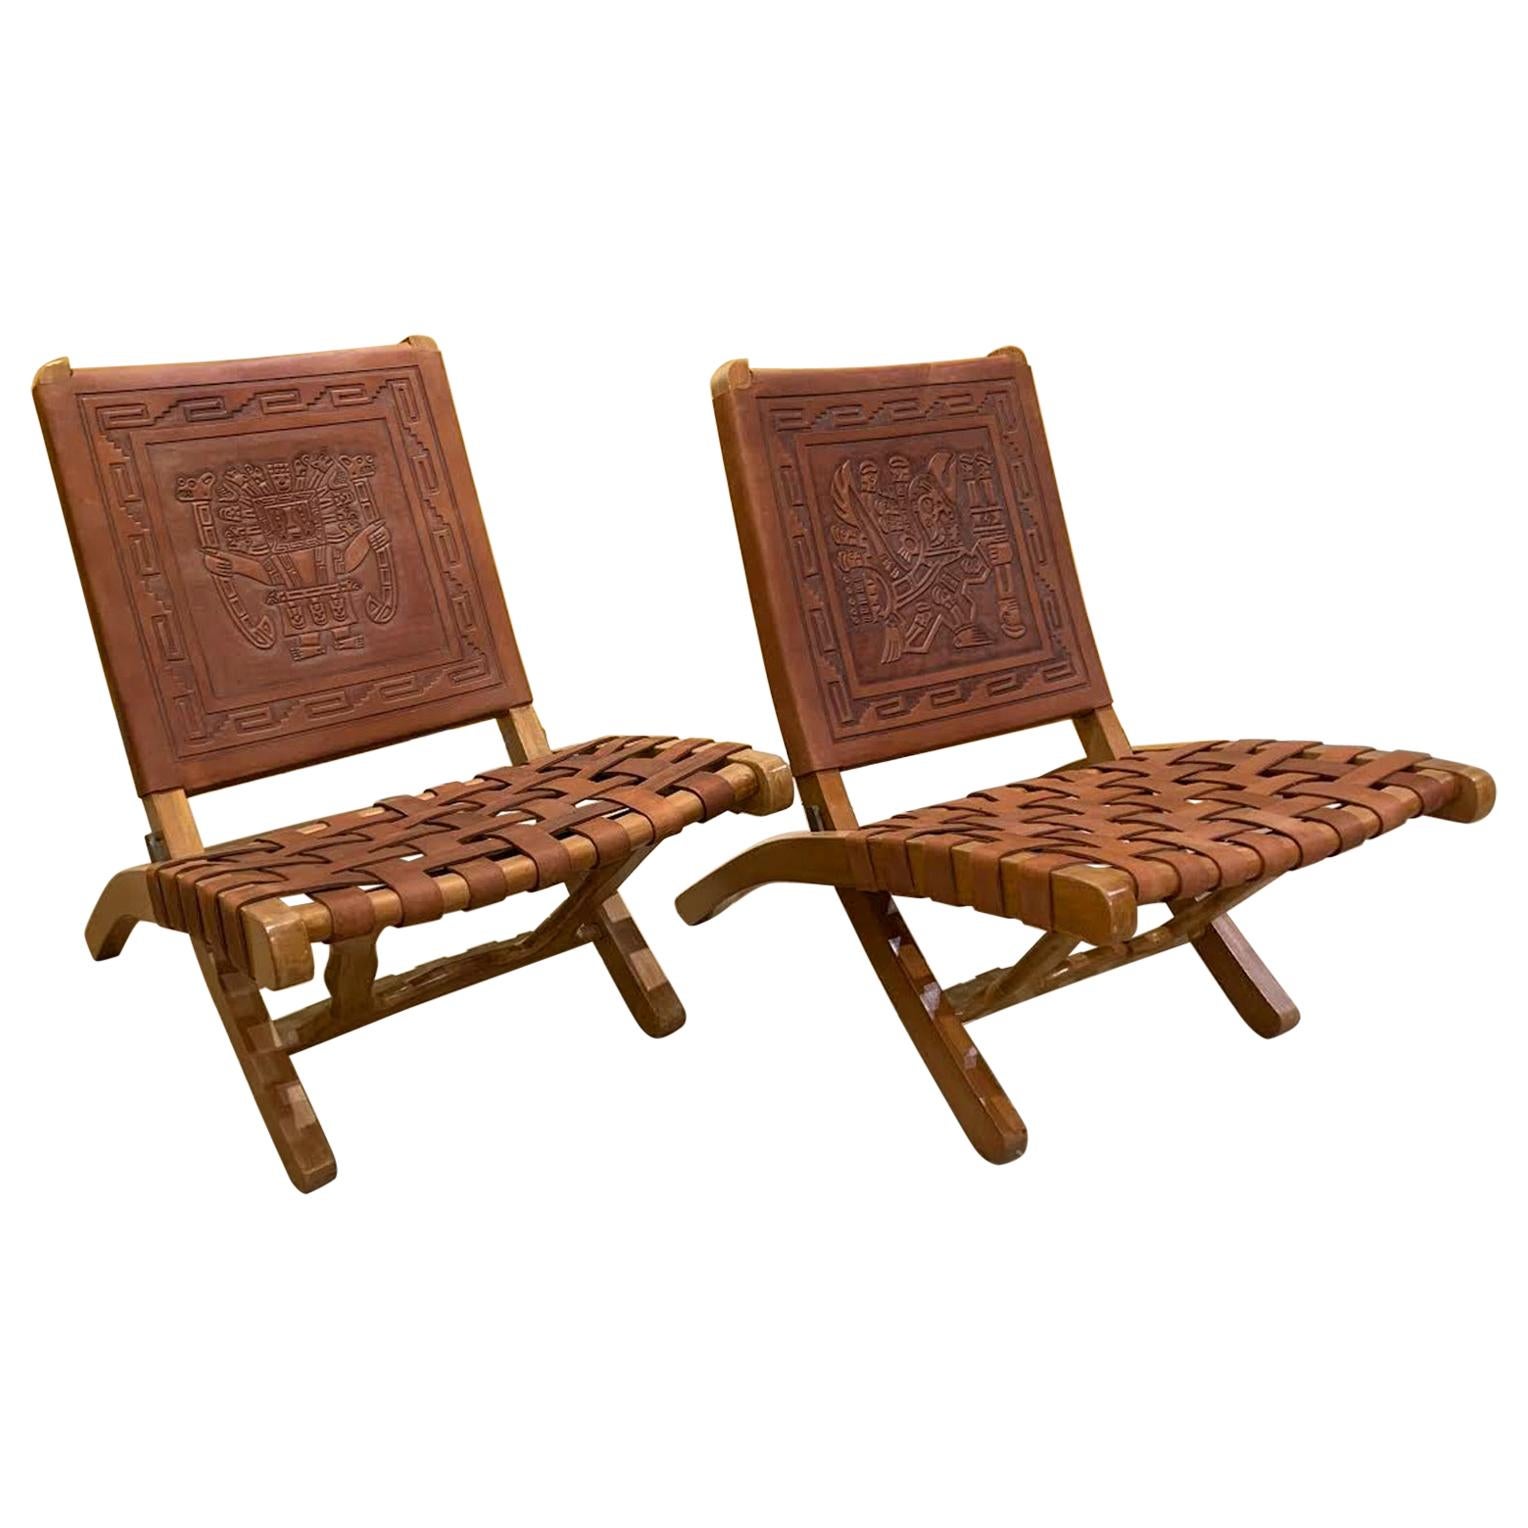 Pair of Wood and Leather Folding Side Chairs from Peru, circa 1970s